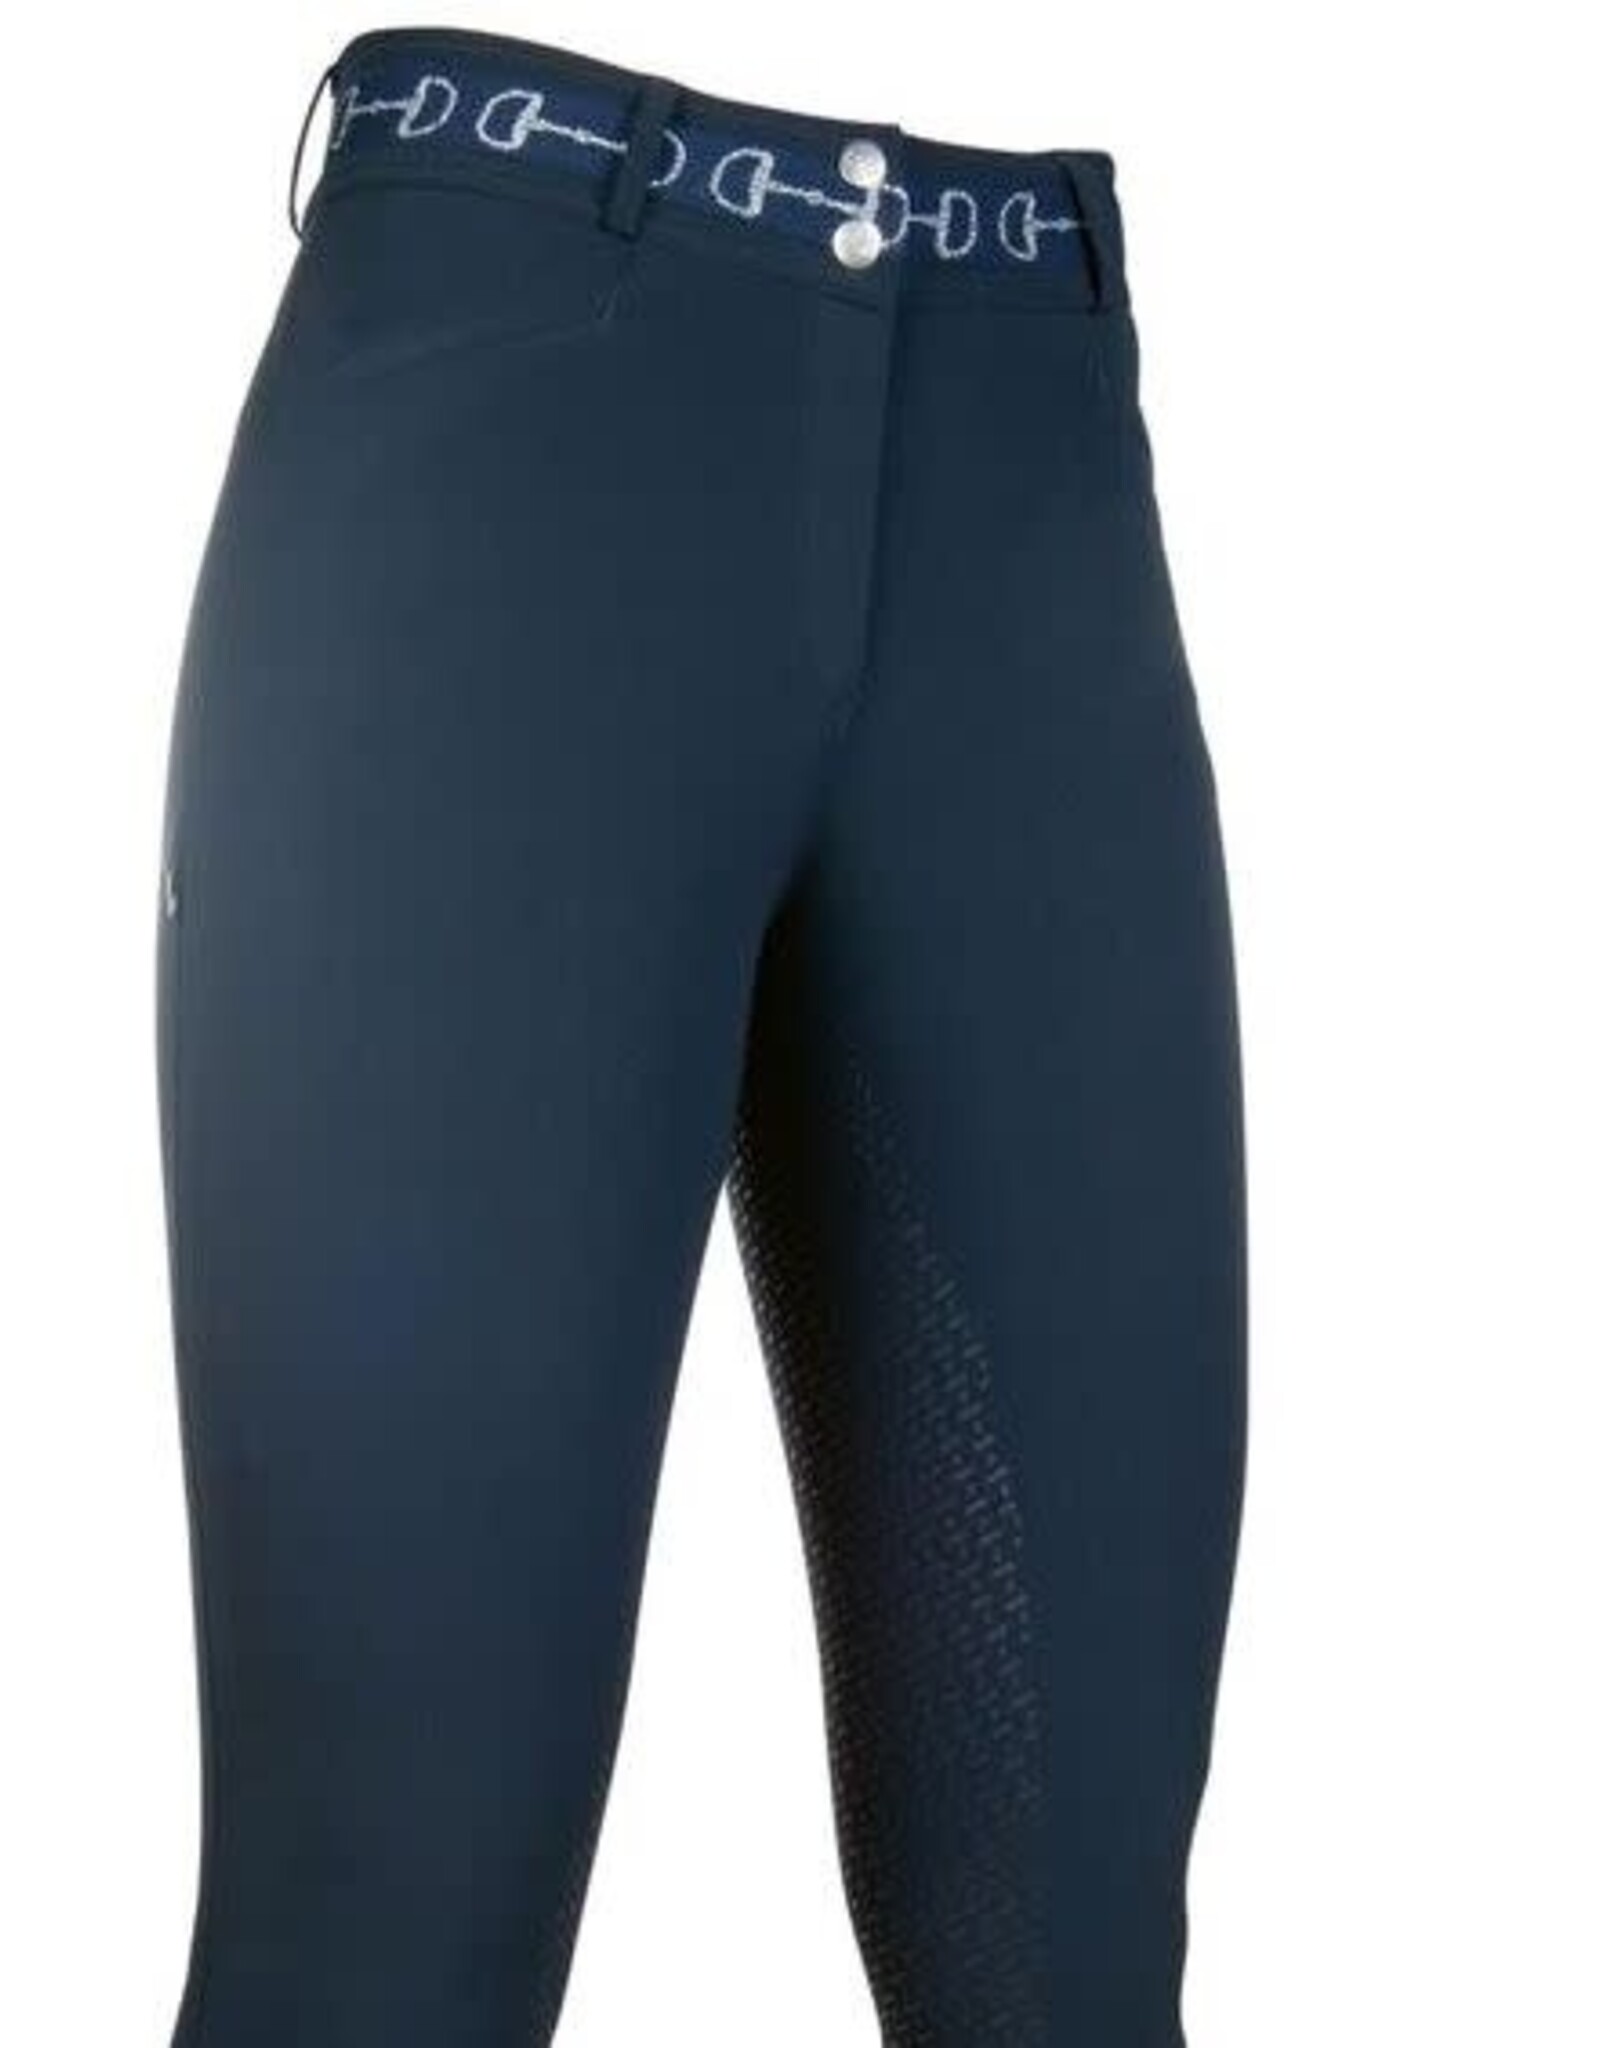 HKM Riding breeches -Monaco- Style silicone knee patch